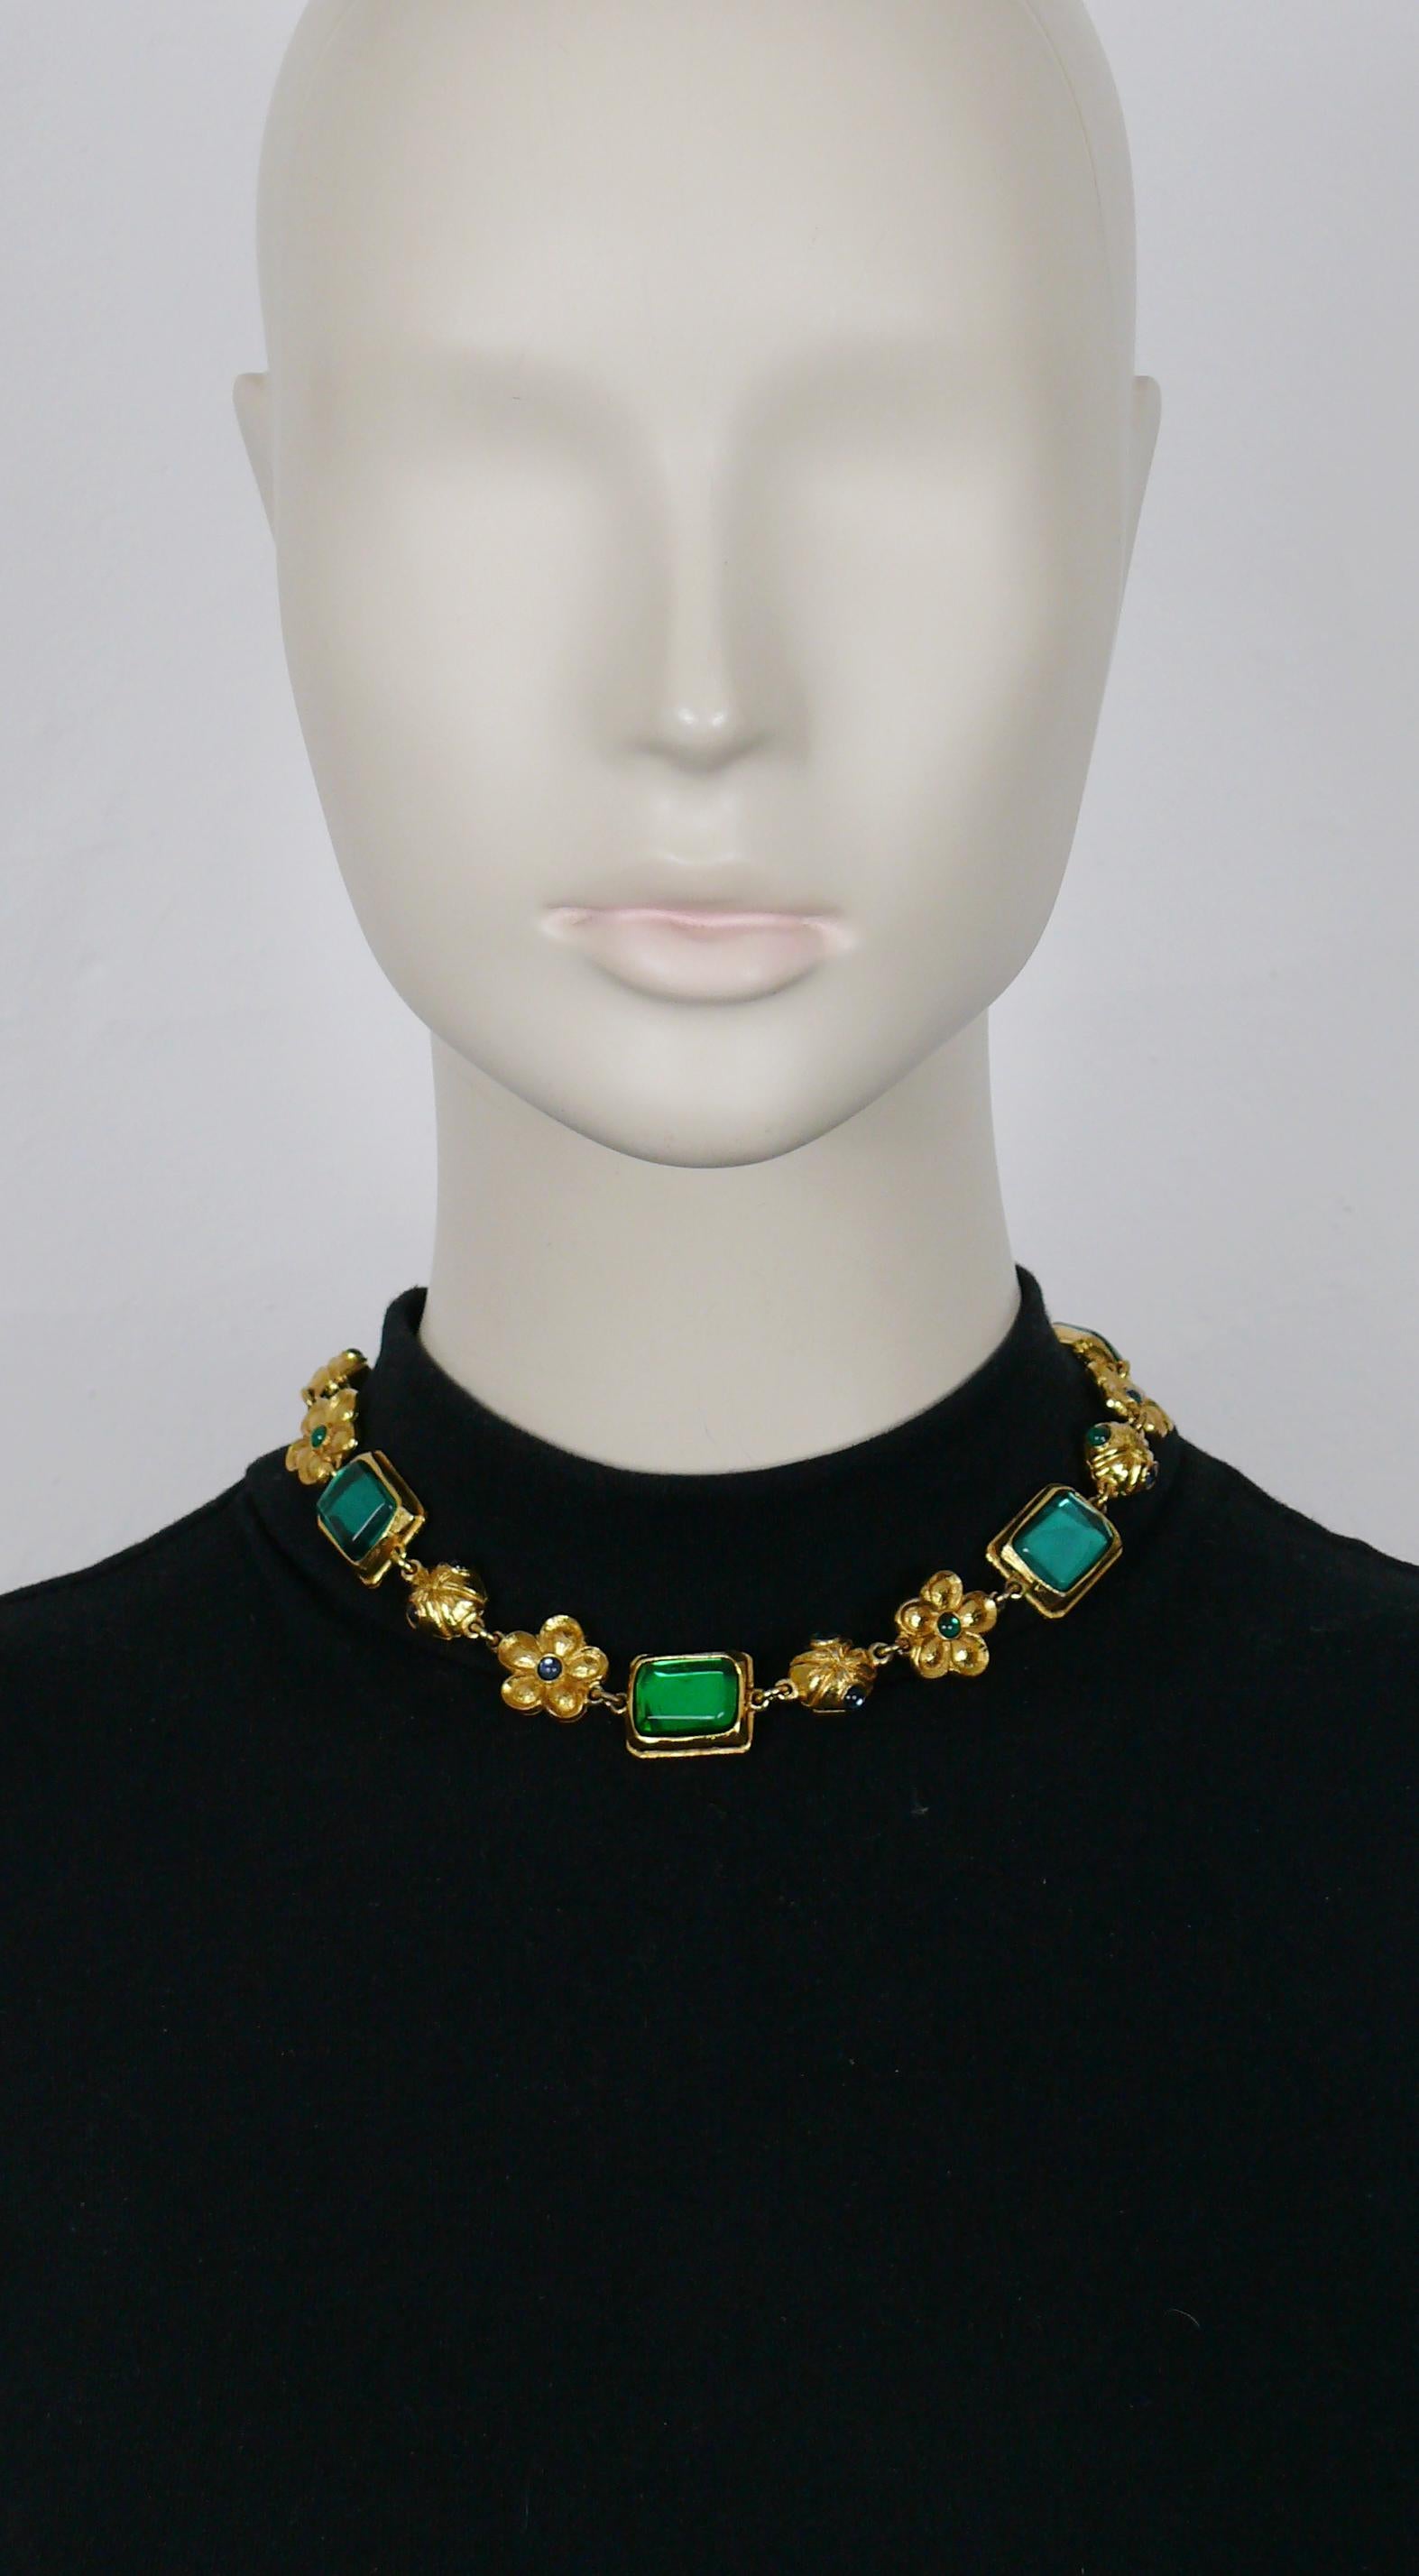 KENZO vintage gold tone necklace featuring flowers, rectangular links and balls embellished with blue/green resin and glass cabochons.

T-bar and toggle closure.

Embossed KENZO PARIS.

Indicative measurements : length approx. 40.5 cm (15.94 inches)